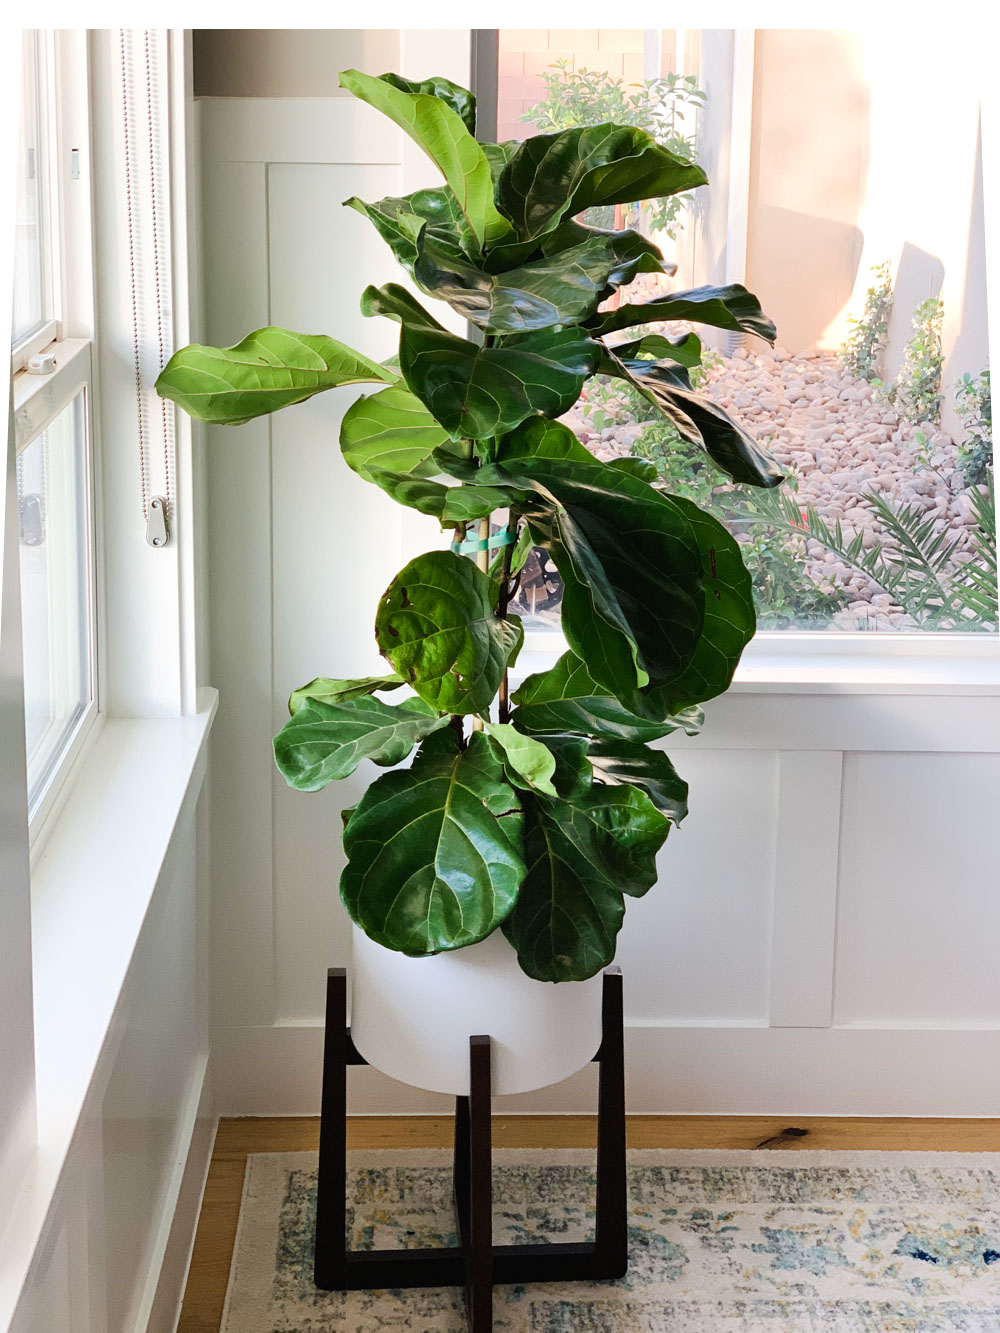 How To Grow A Fiddle Leaf Fig - www.inf-inet.com